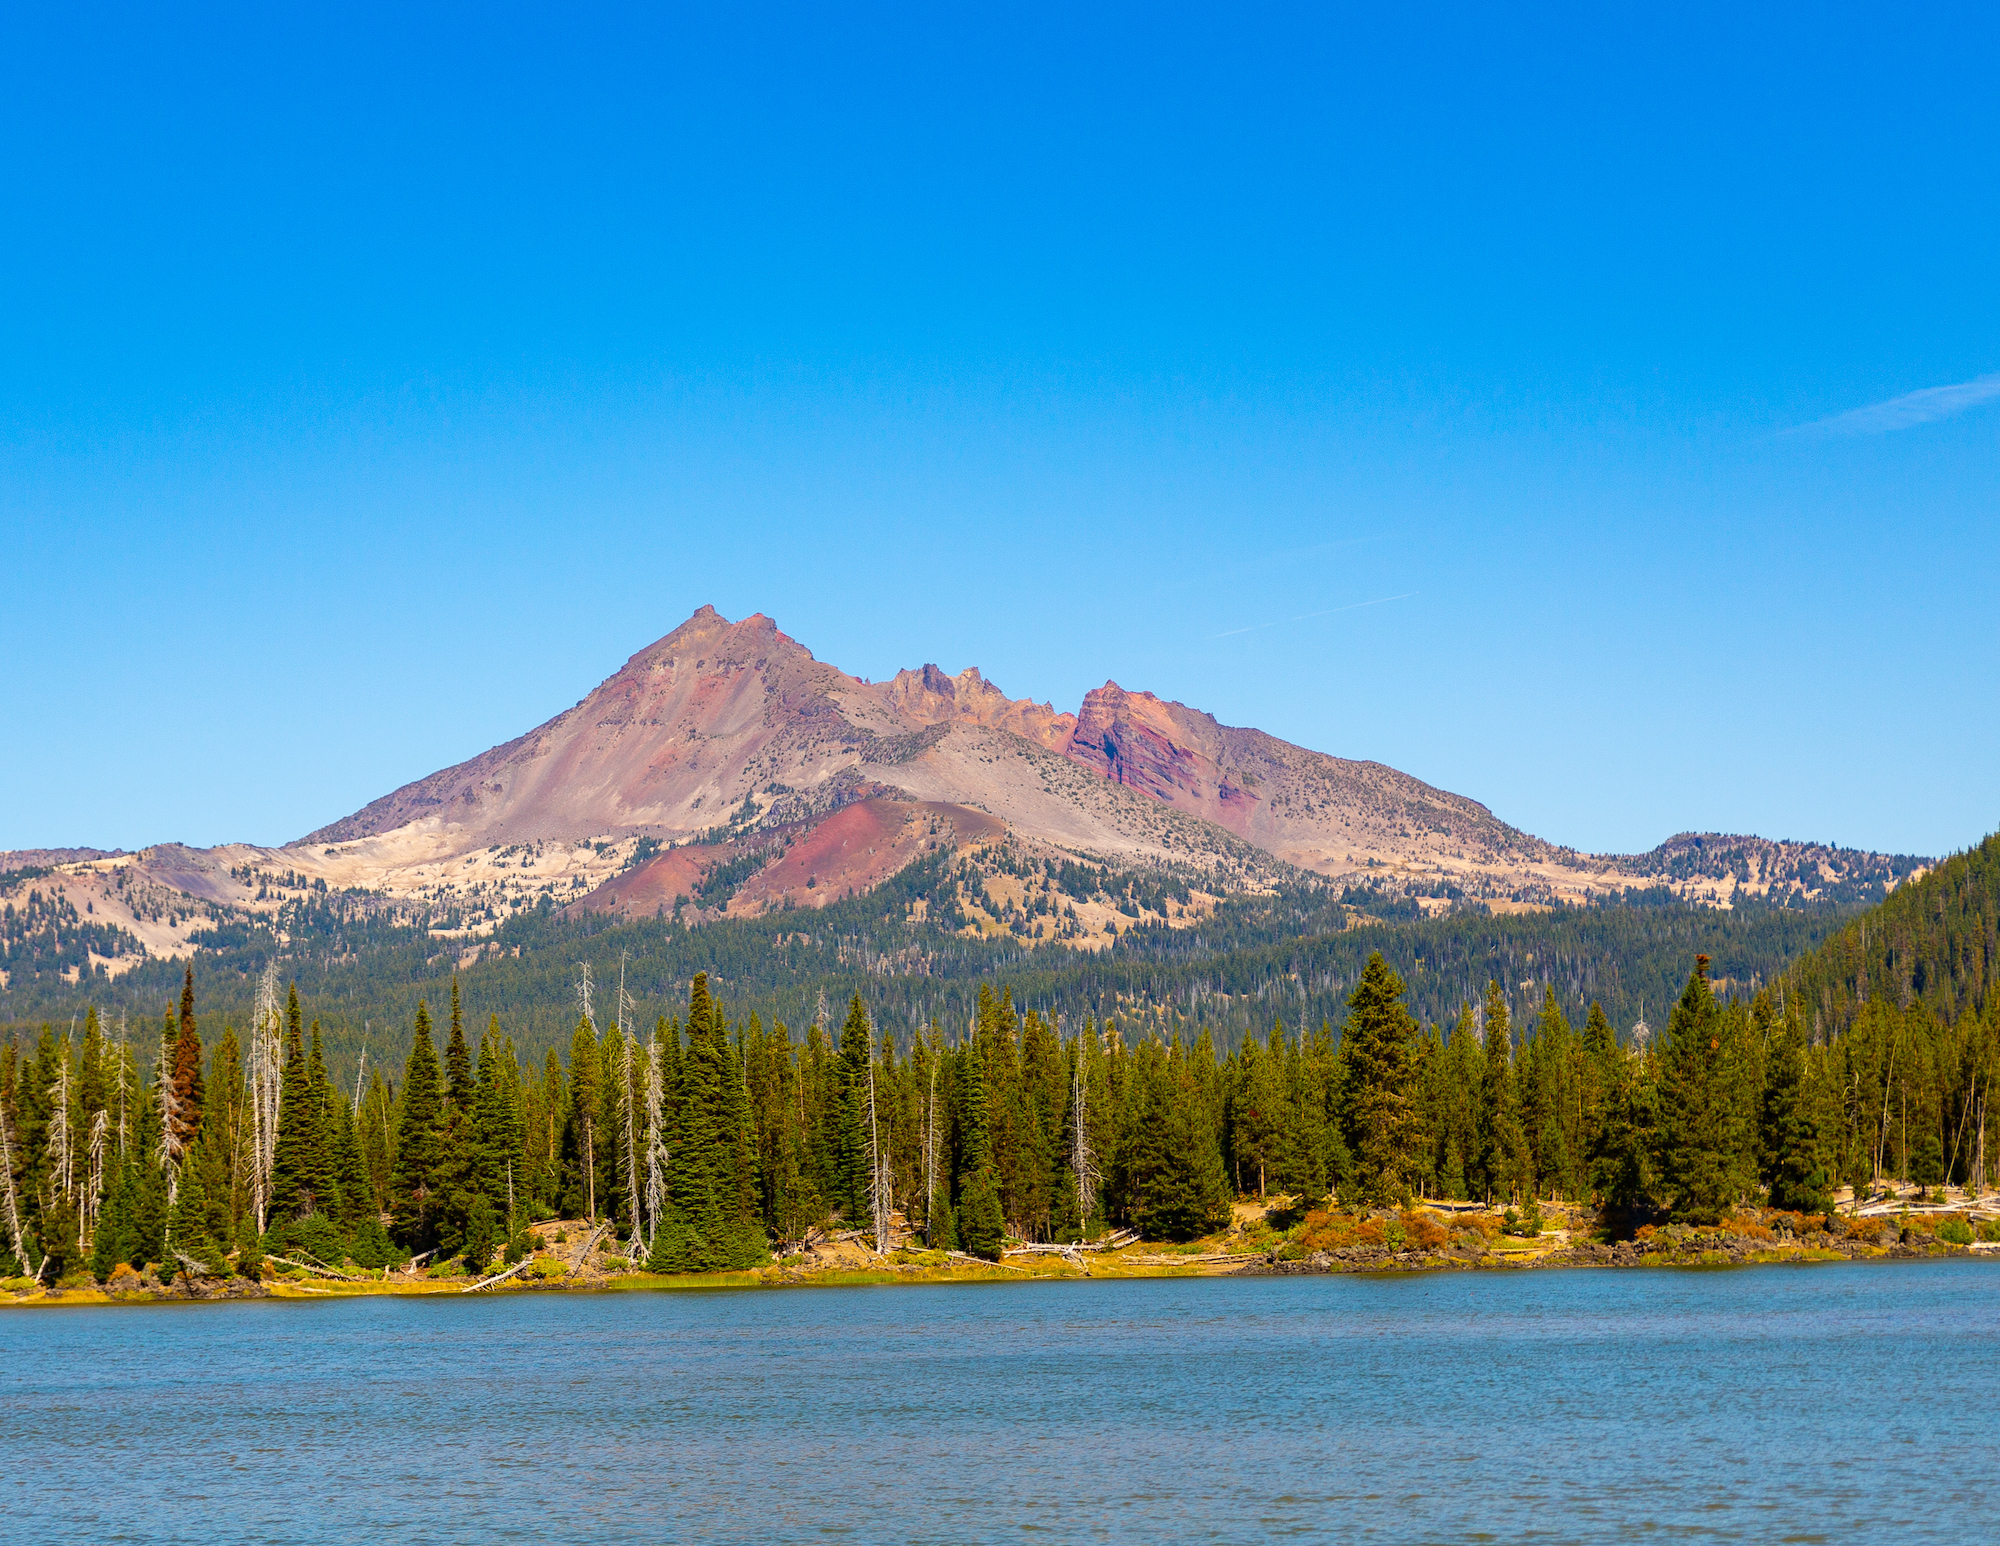 Lava Lake with tall trees around it and a mountain in the distance